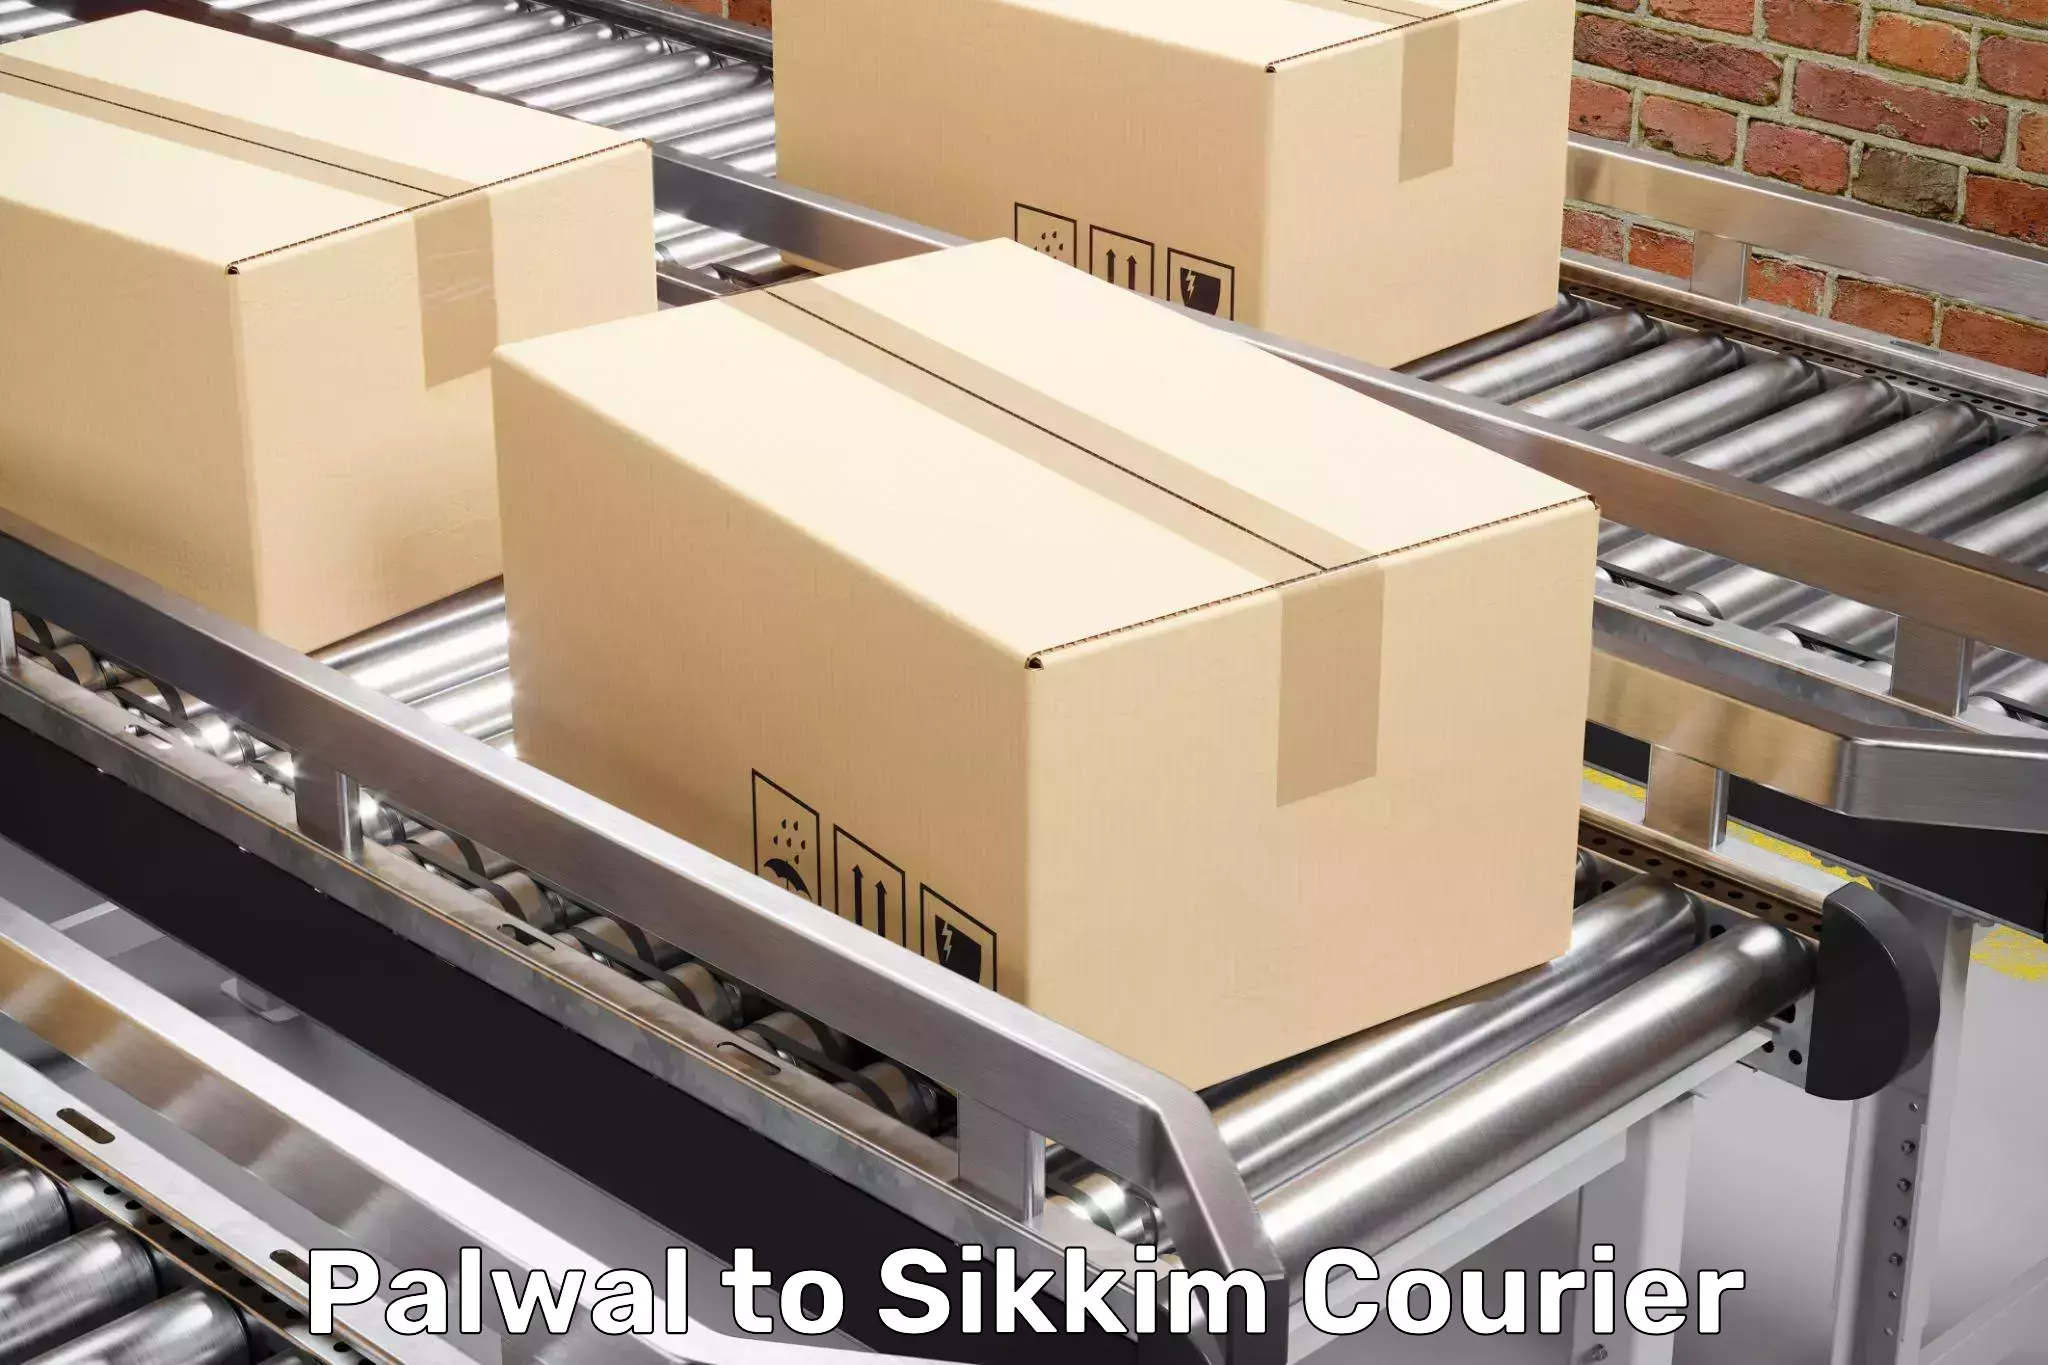 Efficient moving company Palwal to Pelling